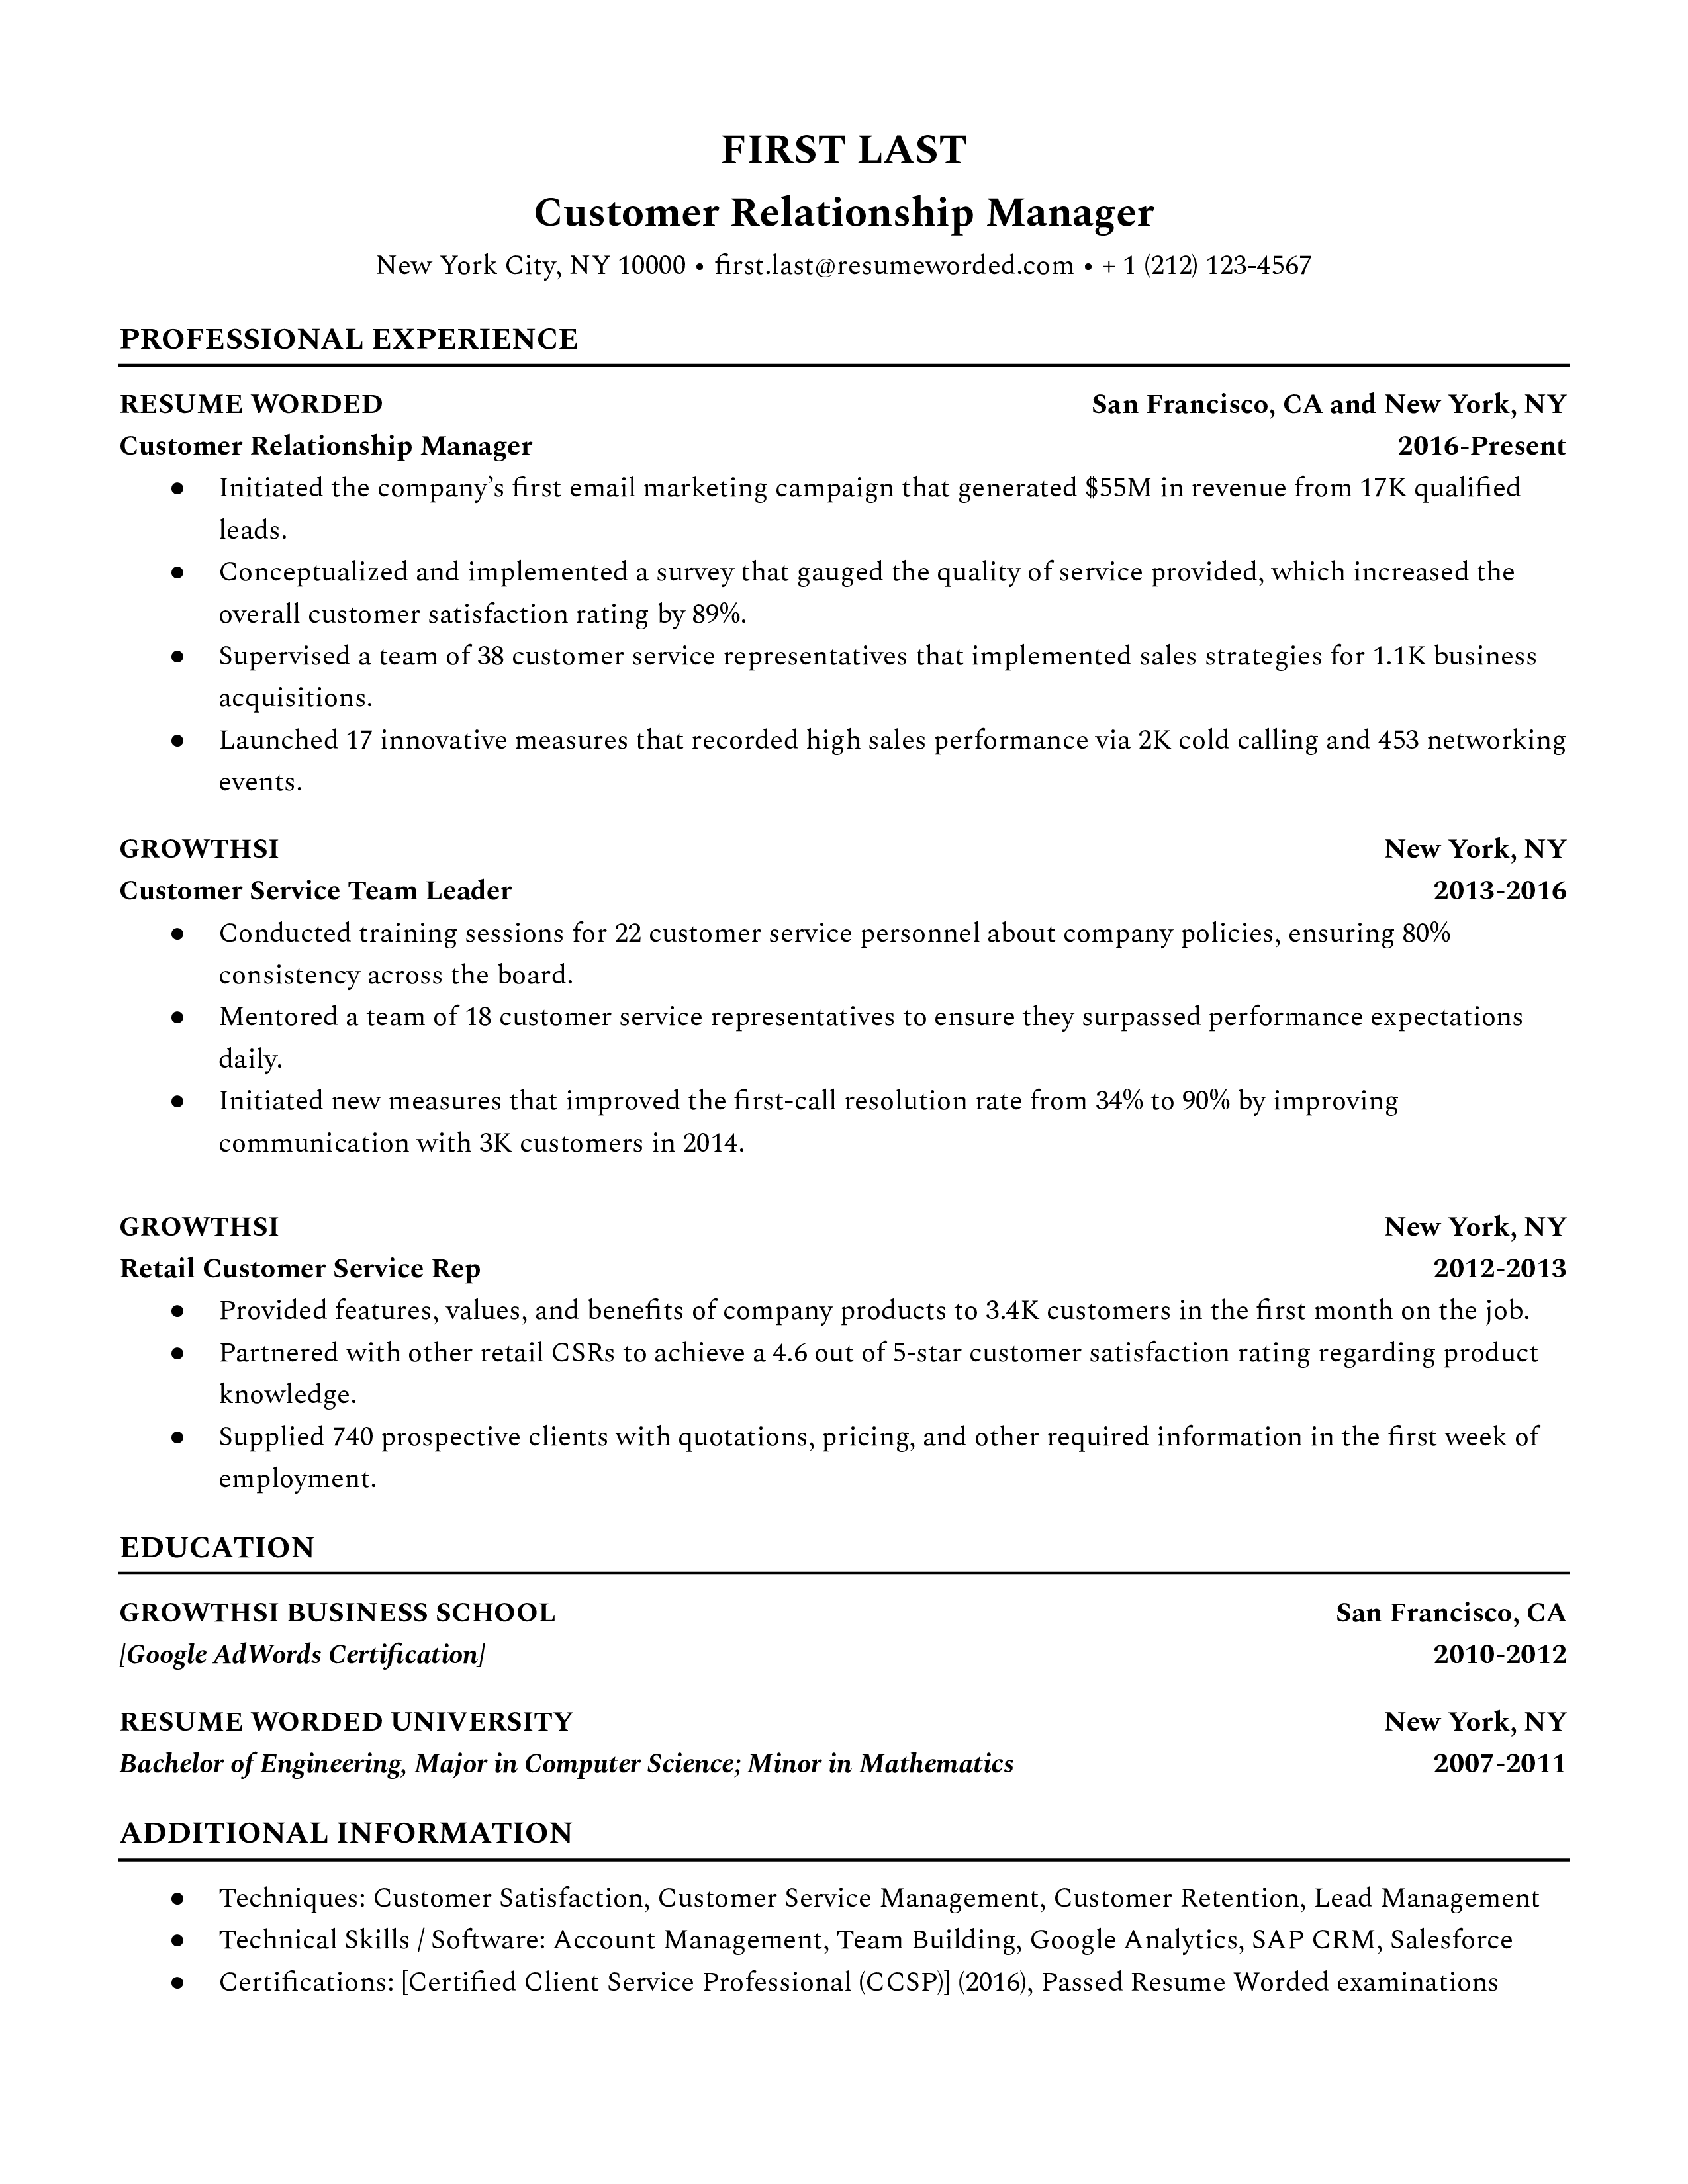 A well-structured CV for a Customer Relationship Manager role.